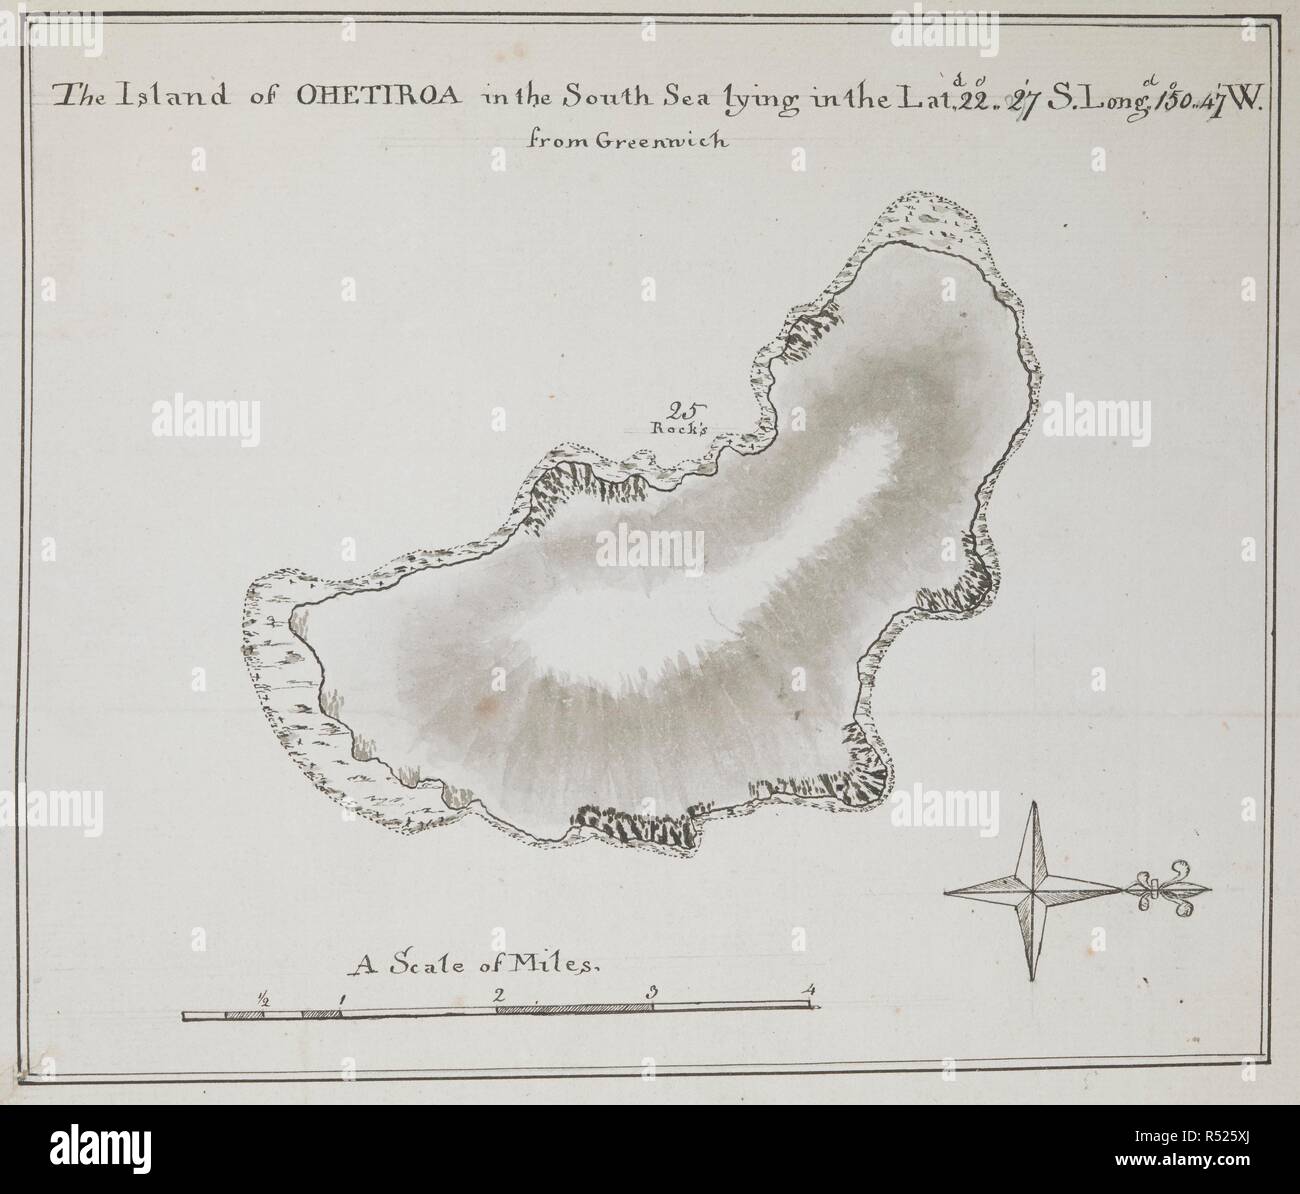 Plan of the Island of Ohetiroa, in the South Sea; drawn by Lieut, James Cook, in his first voyage (1768-1771), on a scale of one mile to an inch. Charts, Plans, Views, and Drawings taken on board the Endeavour during Captain Cook's First Voyage, 1768-1771. 1768-1771. Source: Add. 7085, No.15. Stock Photo